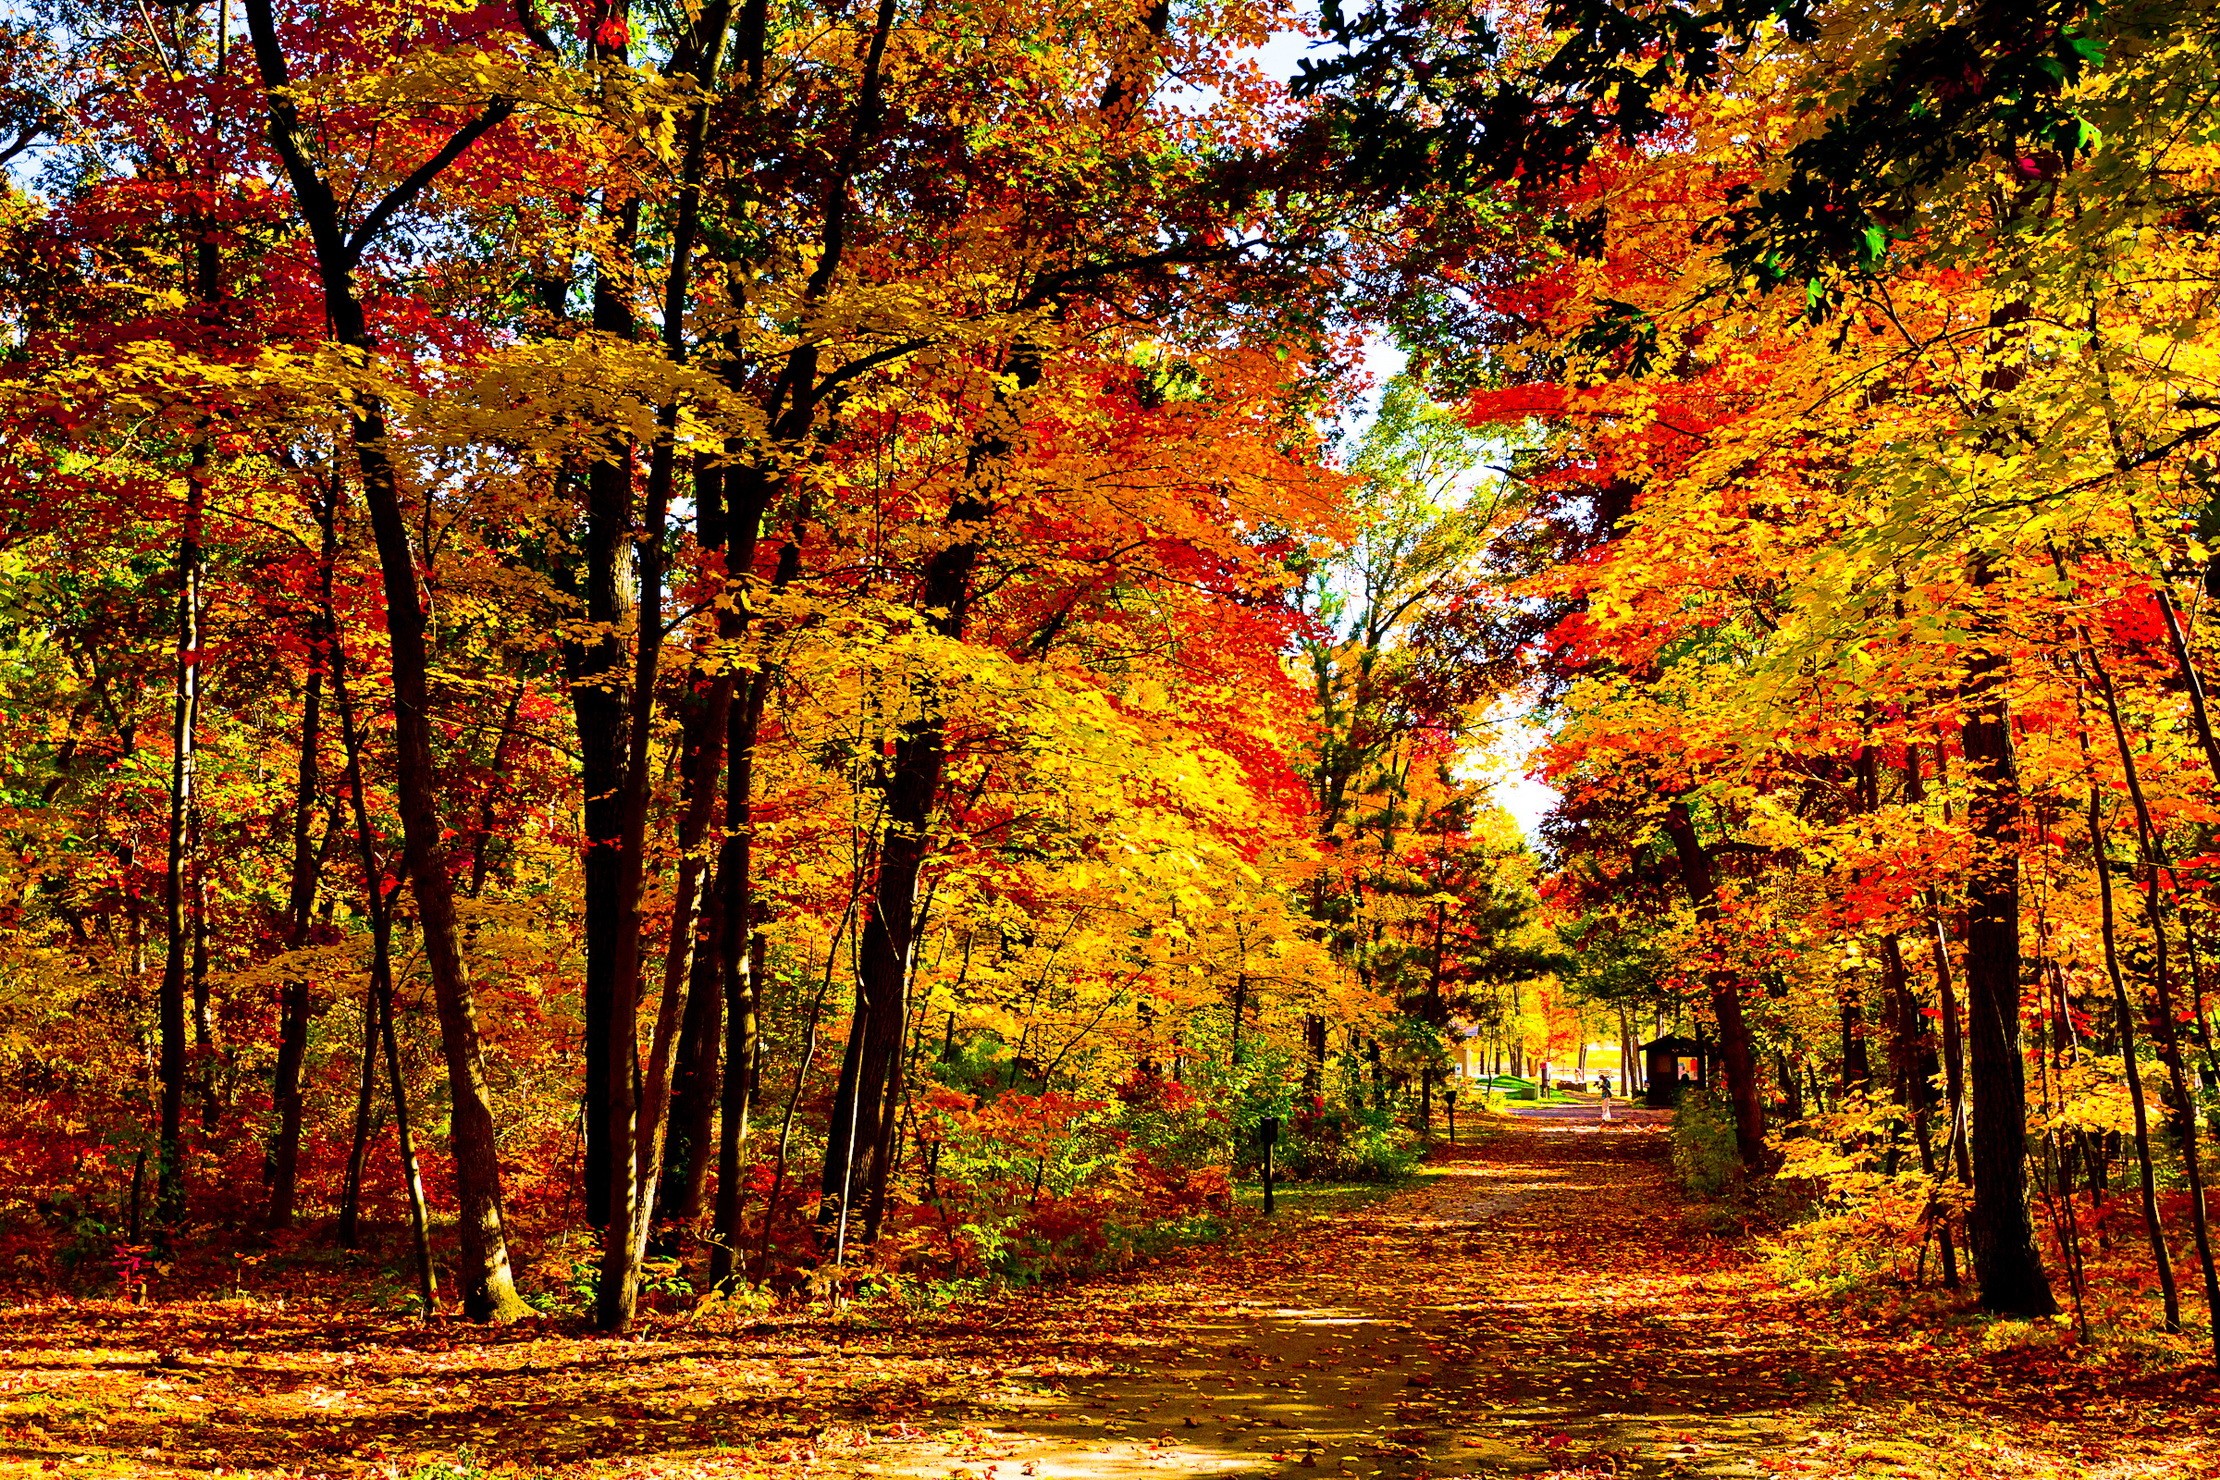 General 2220x1480 nature wood path forest fall red leaves trees fallen leaves